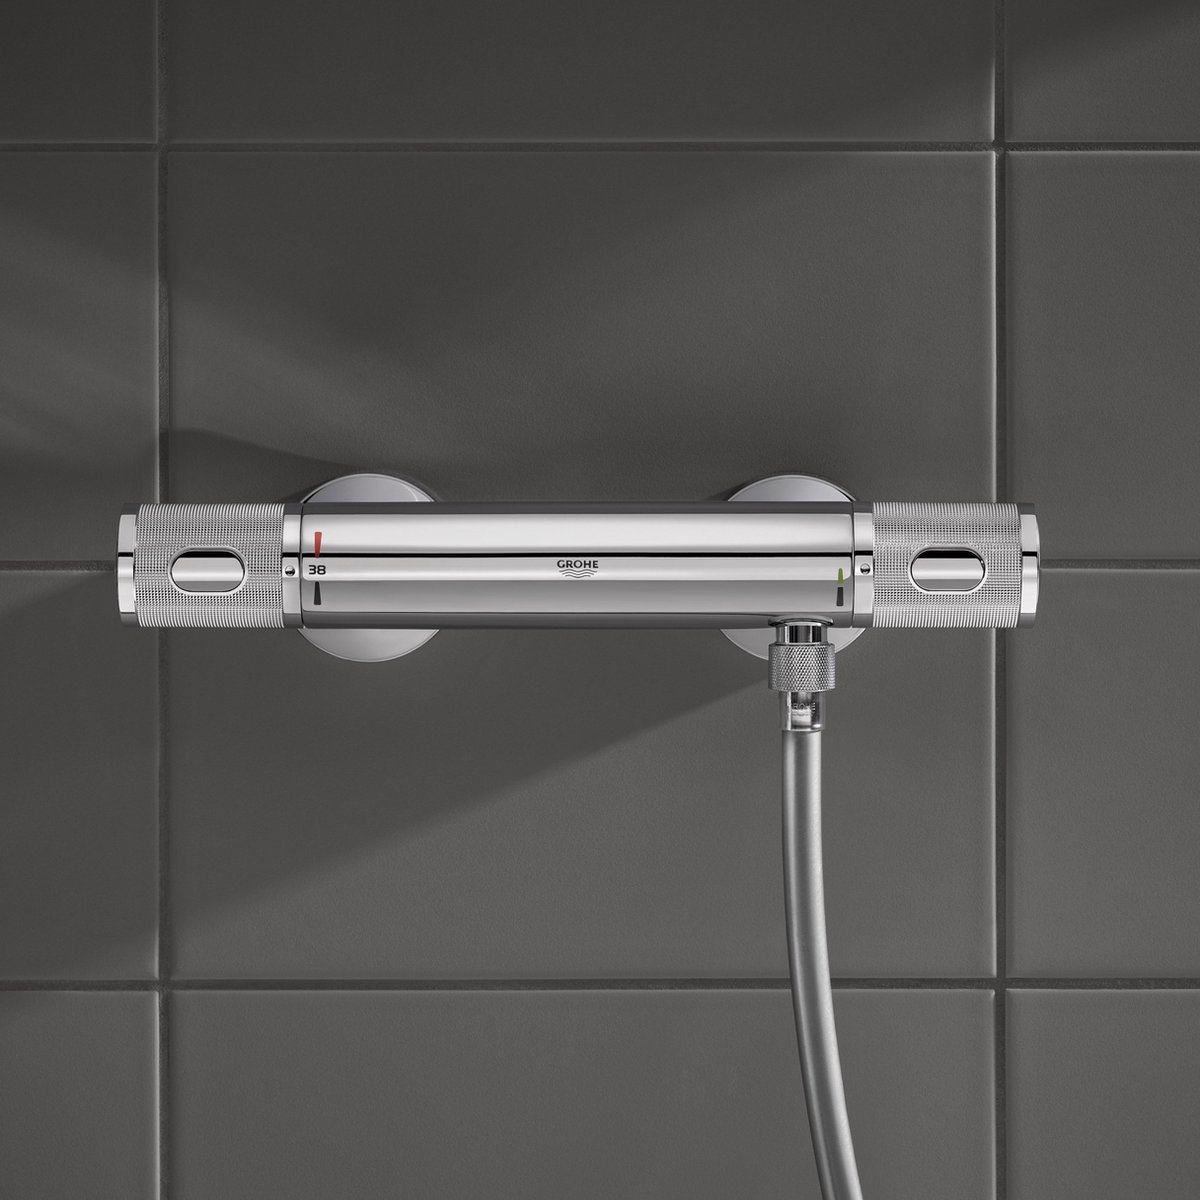 GROHE QuickFix Precision Feel Thermostatische Douchekraan - EcoJoy -  CoolTouch - Incl.... | bol.com